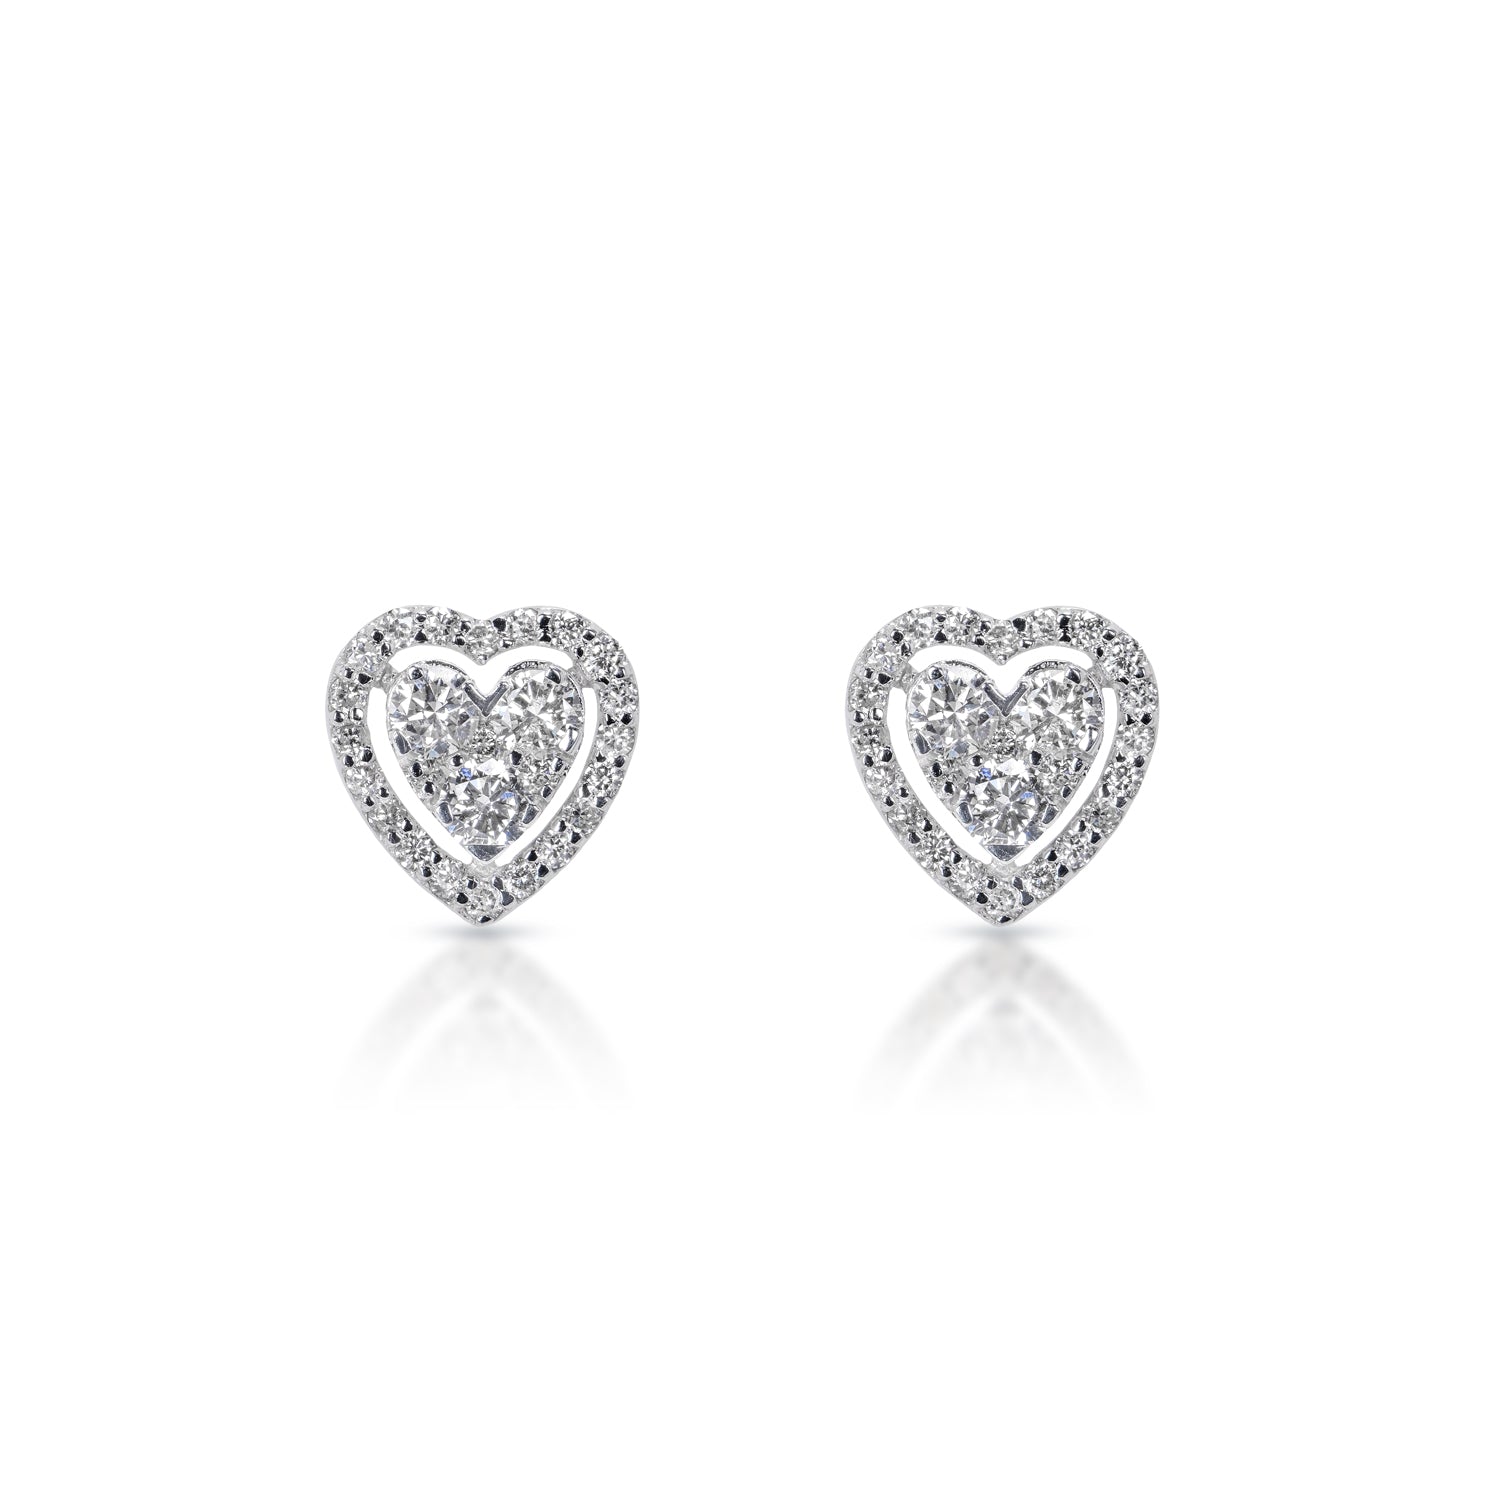 Charlie 0.76 Carat Round Brilliant Heart Diamond Stud Earrings Front Vieww